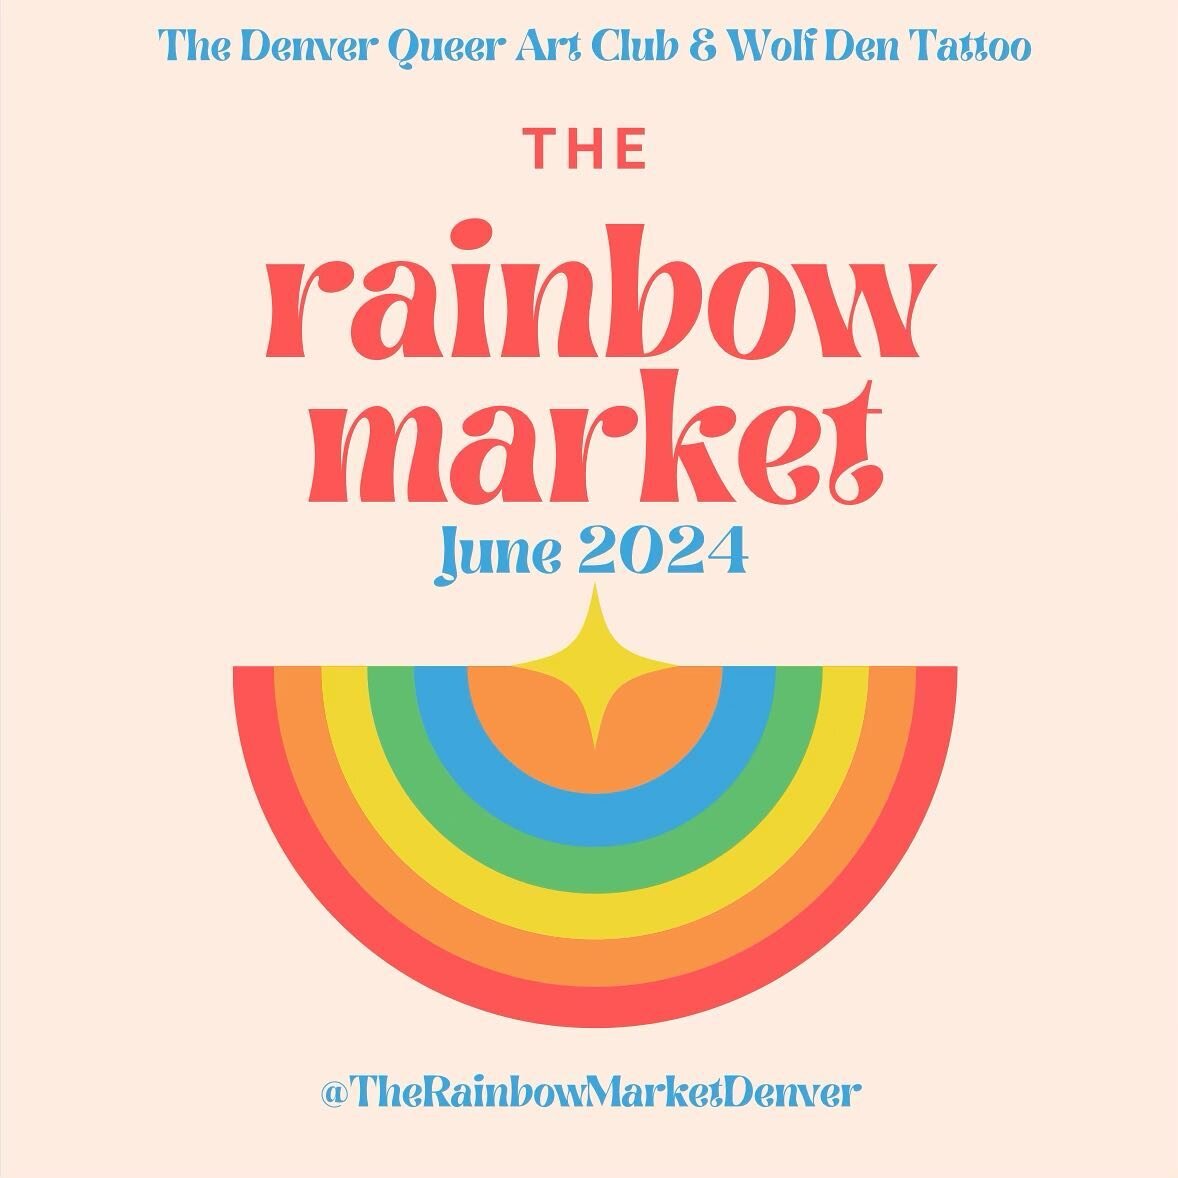 Denver!! The third annual Rainbow Market is right around the corner! Keep your eyes peeled for surprises and updates coming sooner than you think 👀✨🌈 

Vendor applications go live at the end of March&hellip;get creative and make sure you follow @th